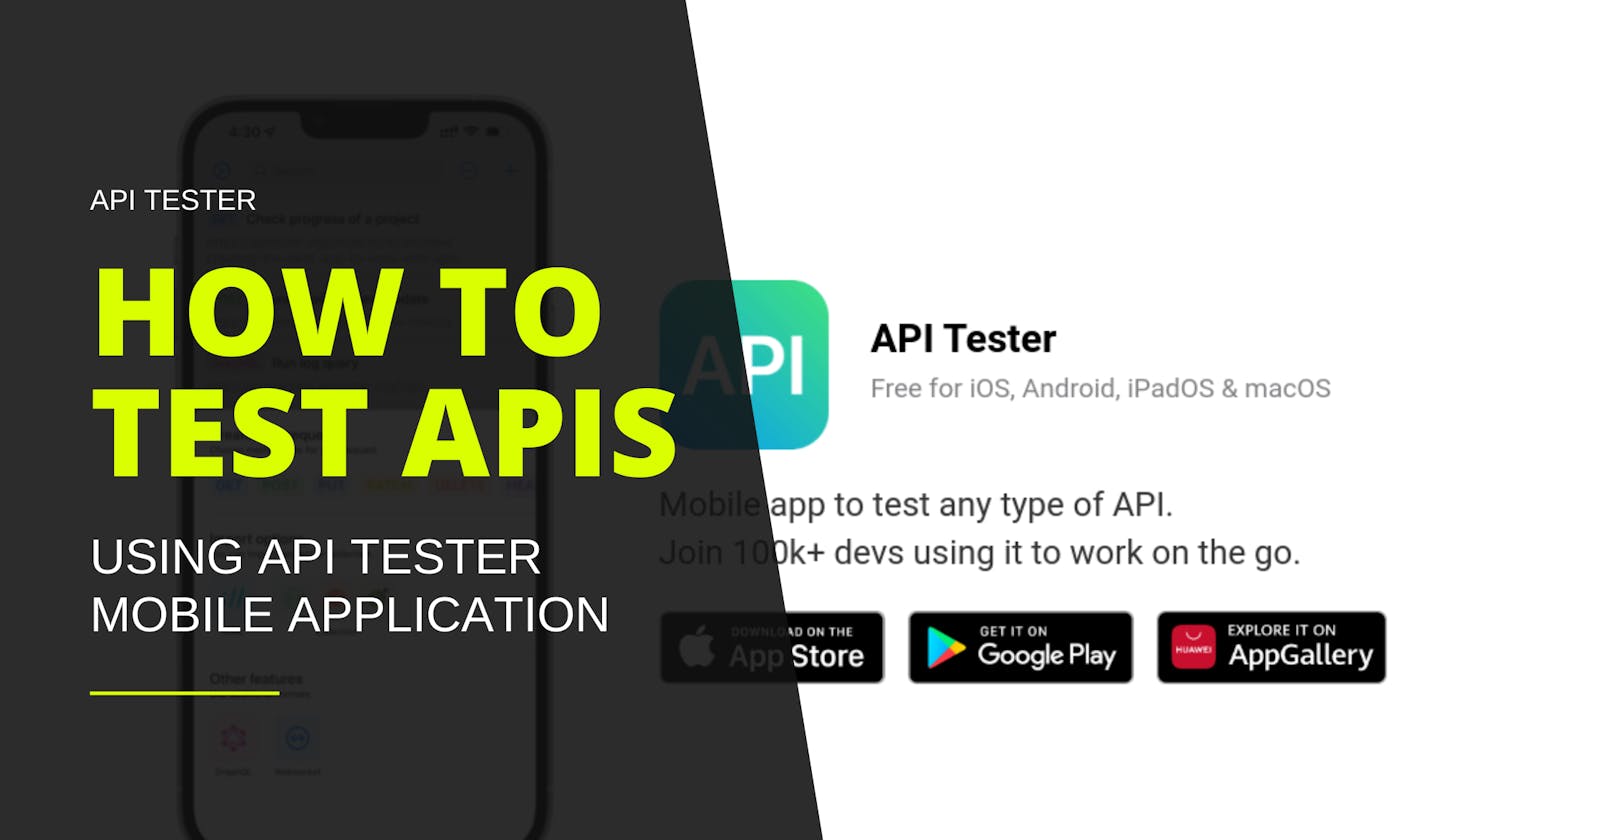 How to Test APIs on Mobile using API Tester